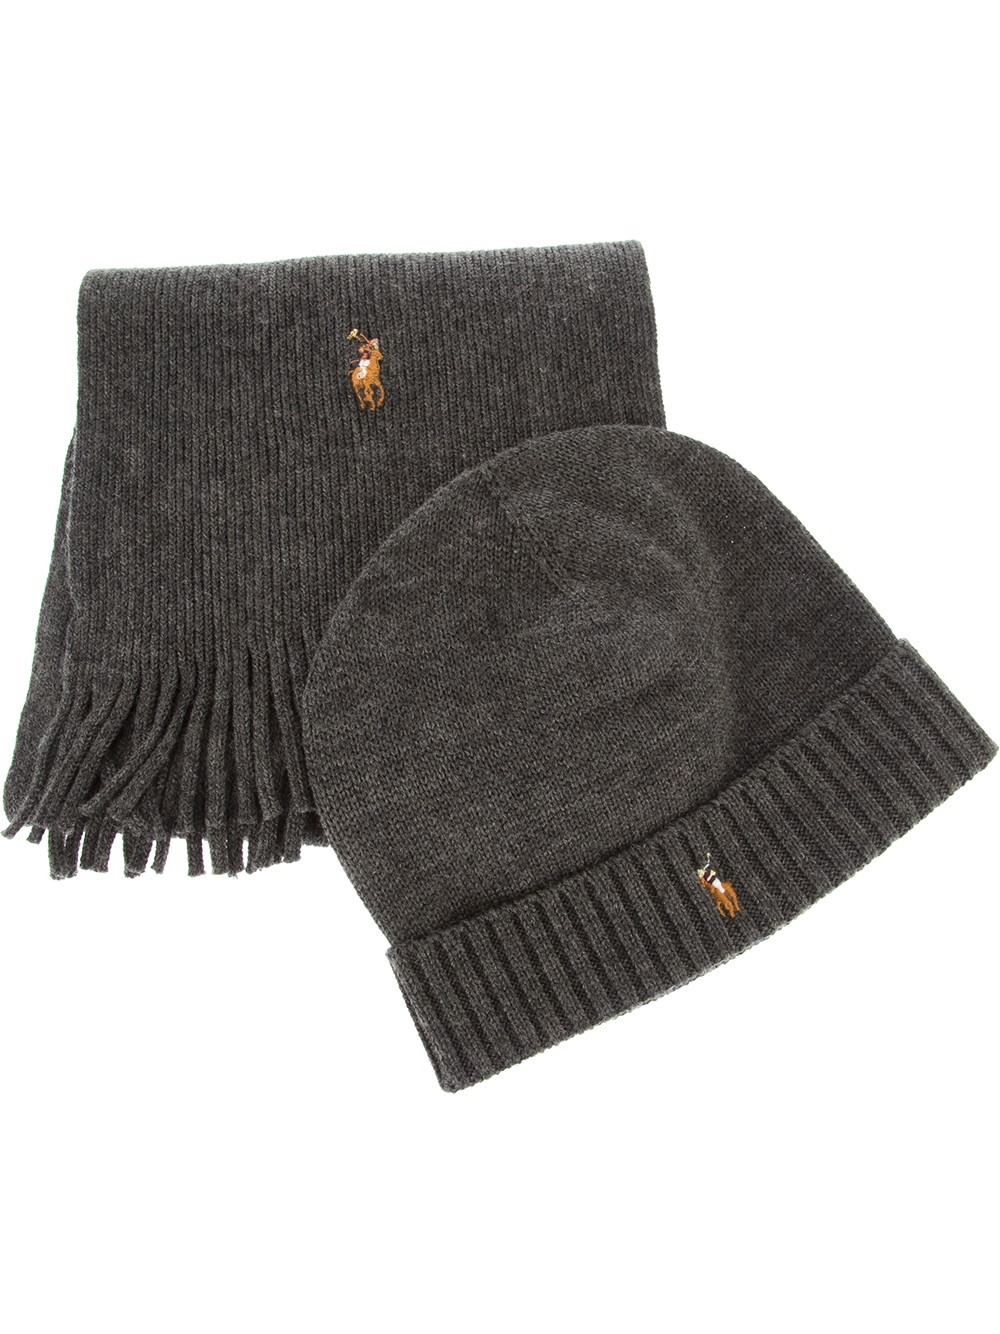 Polo Ralph Lauren Ribbed Scarf and Hat Set in Grey (Gray) for Men - Lyst